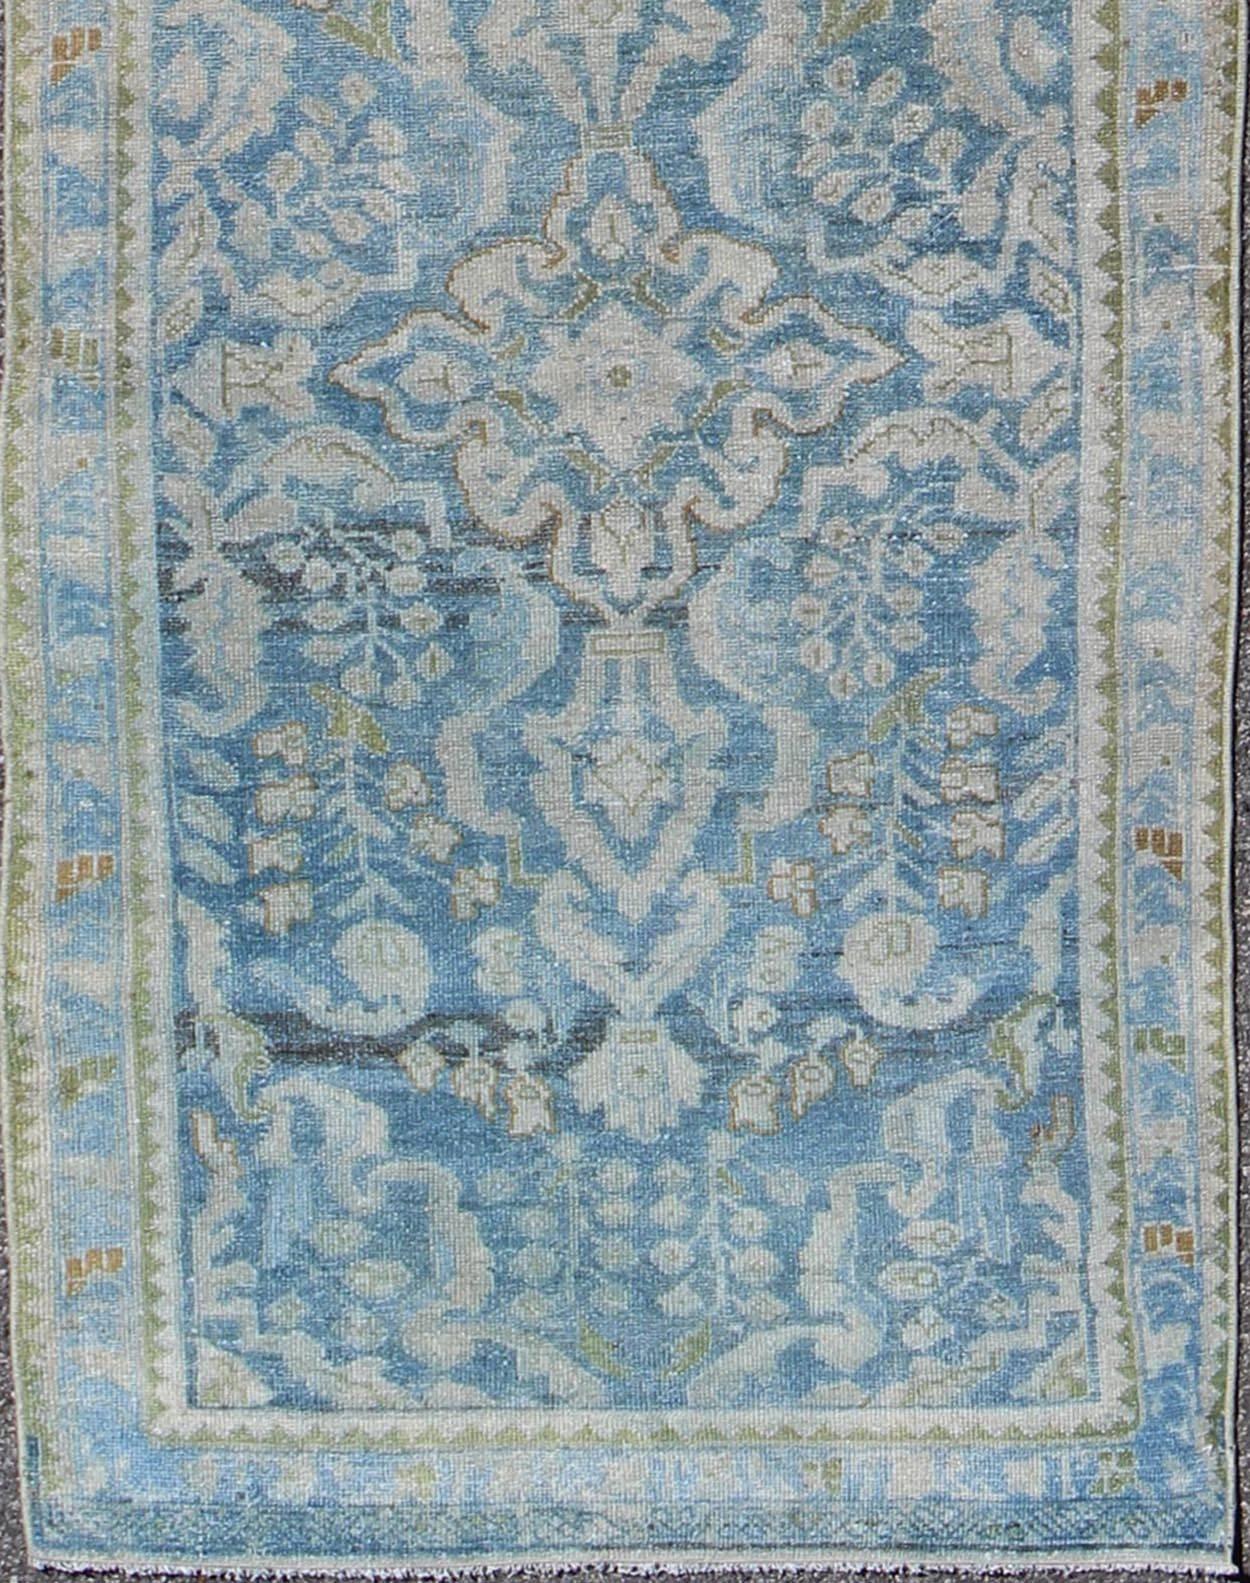 Antique Persian Malayer runner with all-over design in blue and hints of olive, rug sus-1803-124, country of origin / type: Iran / Malayer, circa 1910.

This antique Persian Malayer runner was handwoven in the early 20th century (circa 1910) and